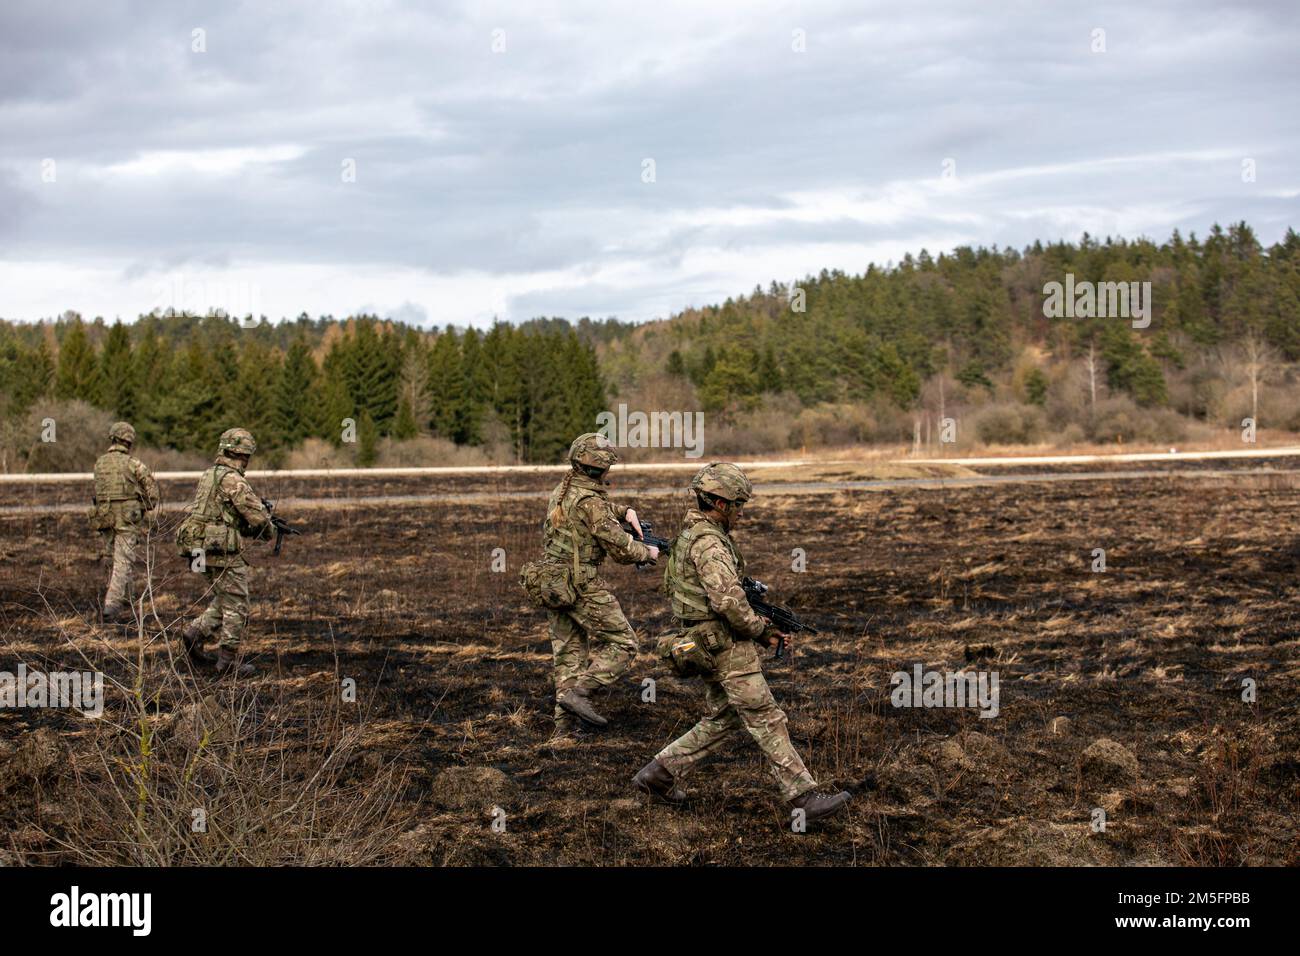 A squad of British Army Officer Cadets with the Royal Military Academy Sandhurst begin a tactical live fire exercise at U.S. 7th Army Training Command's Grafenwoehr Training Area, Grafenwoehr, Germany, March 14, 2022. Stock Photo